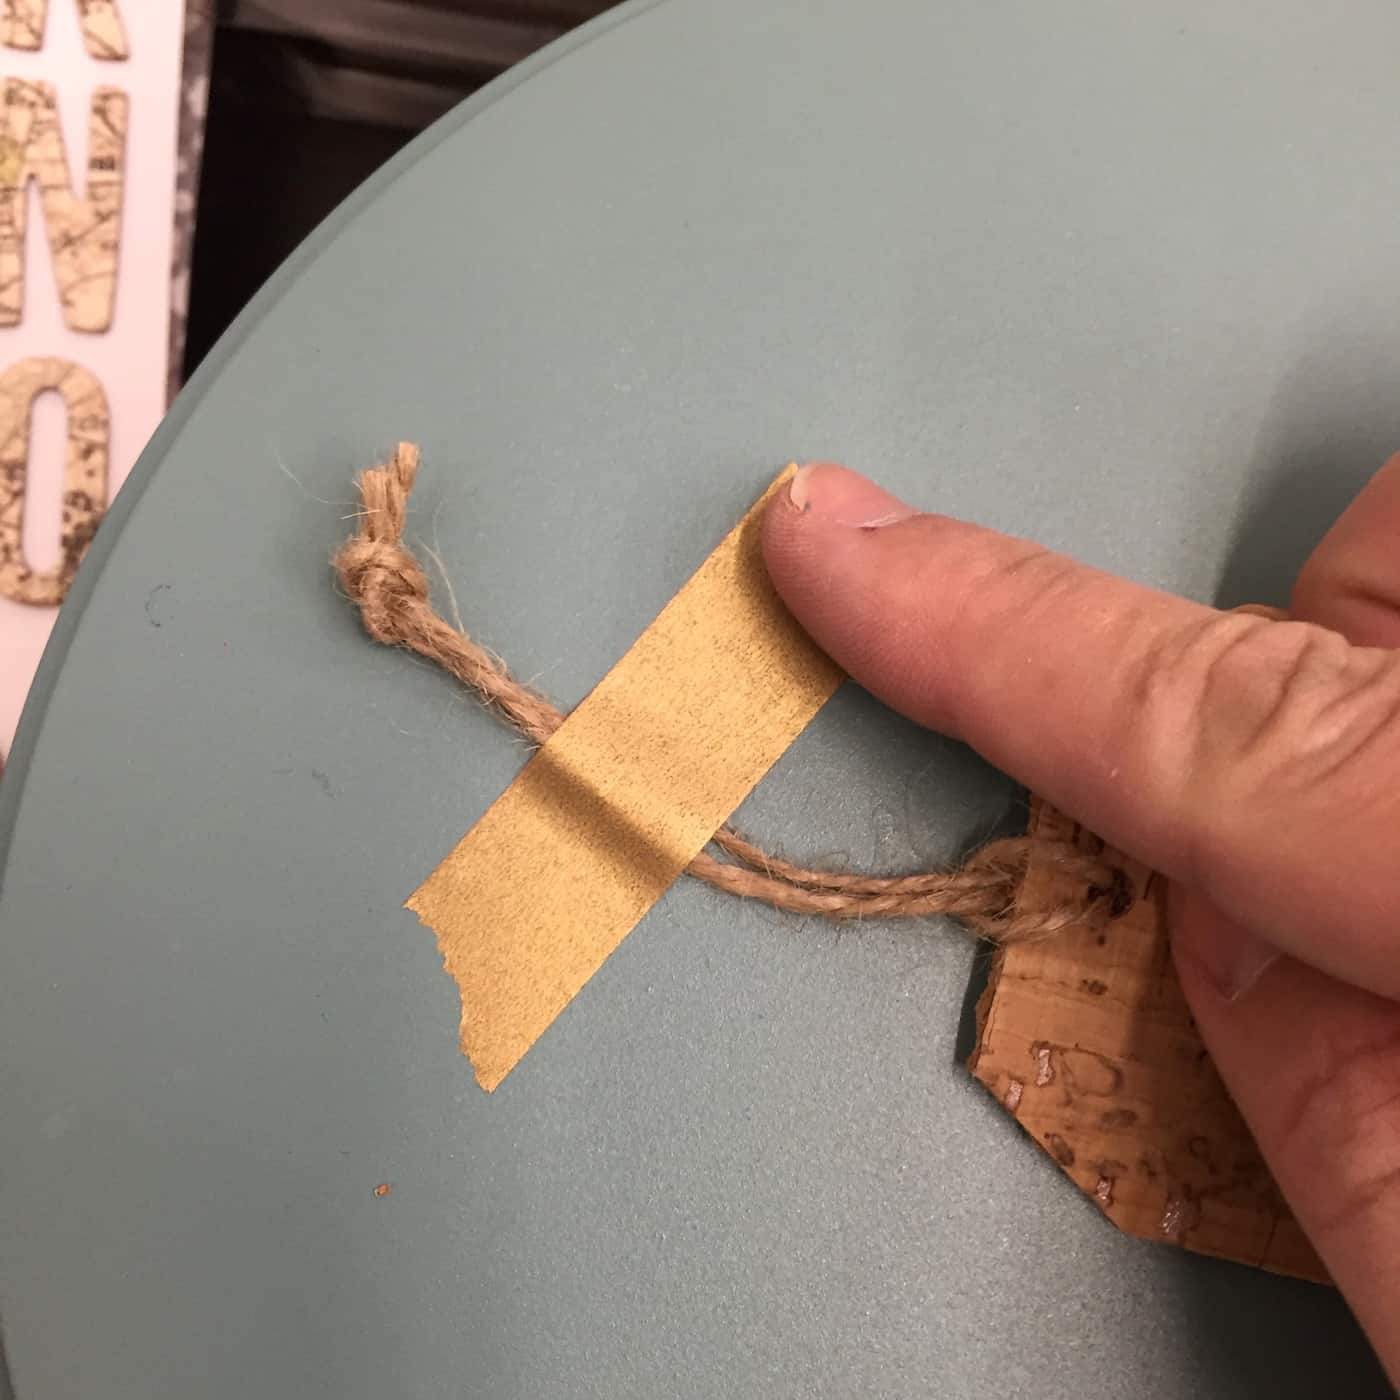 Taping a tag to the top of a metal lid with washi tape